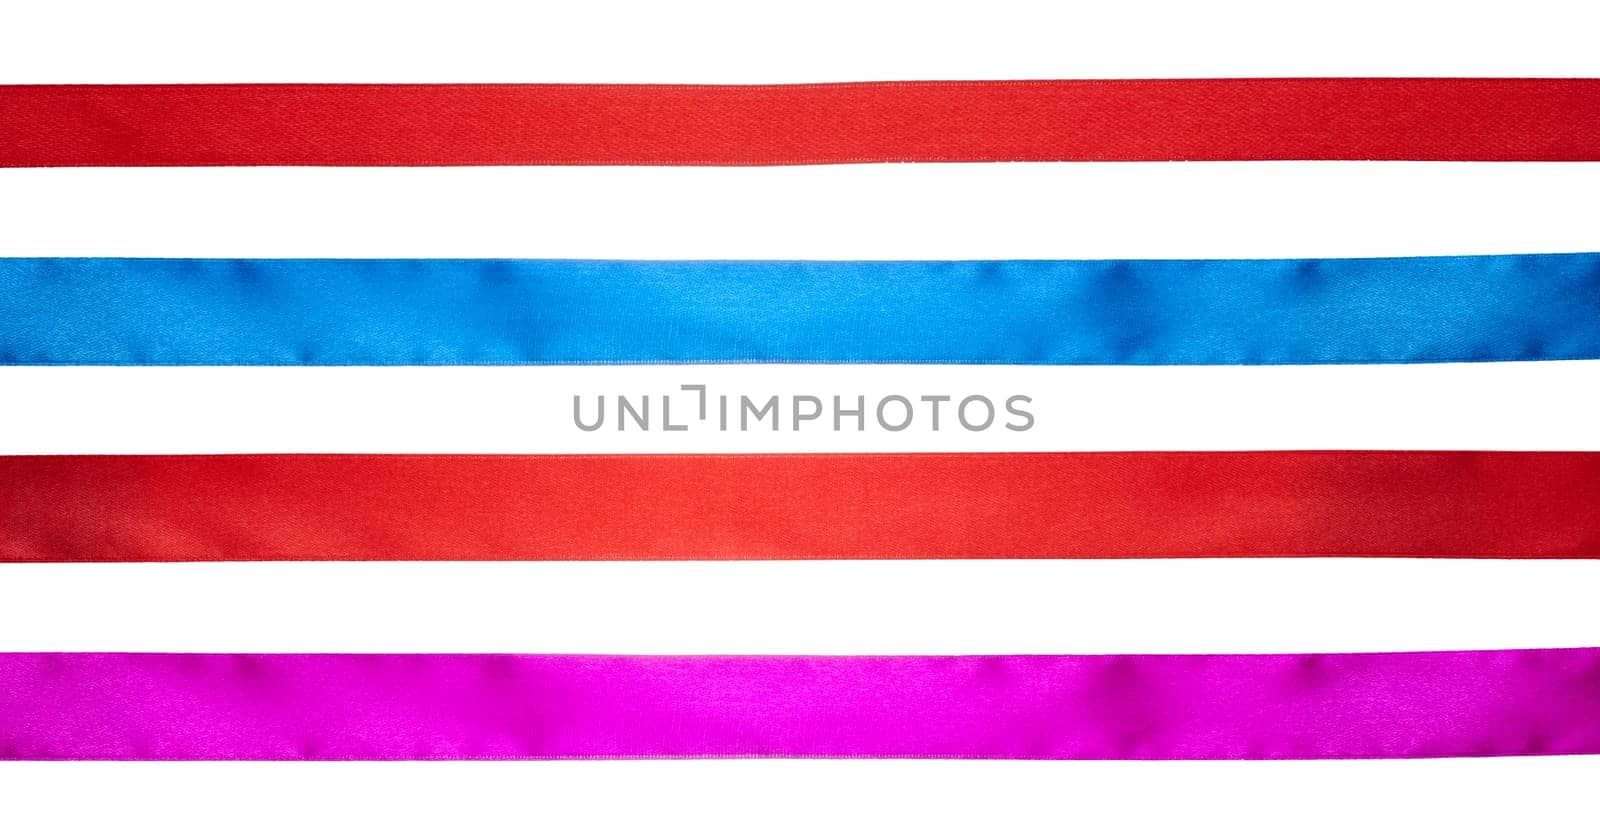 Red, blue and pink silk ribbons on isolated background